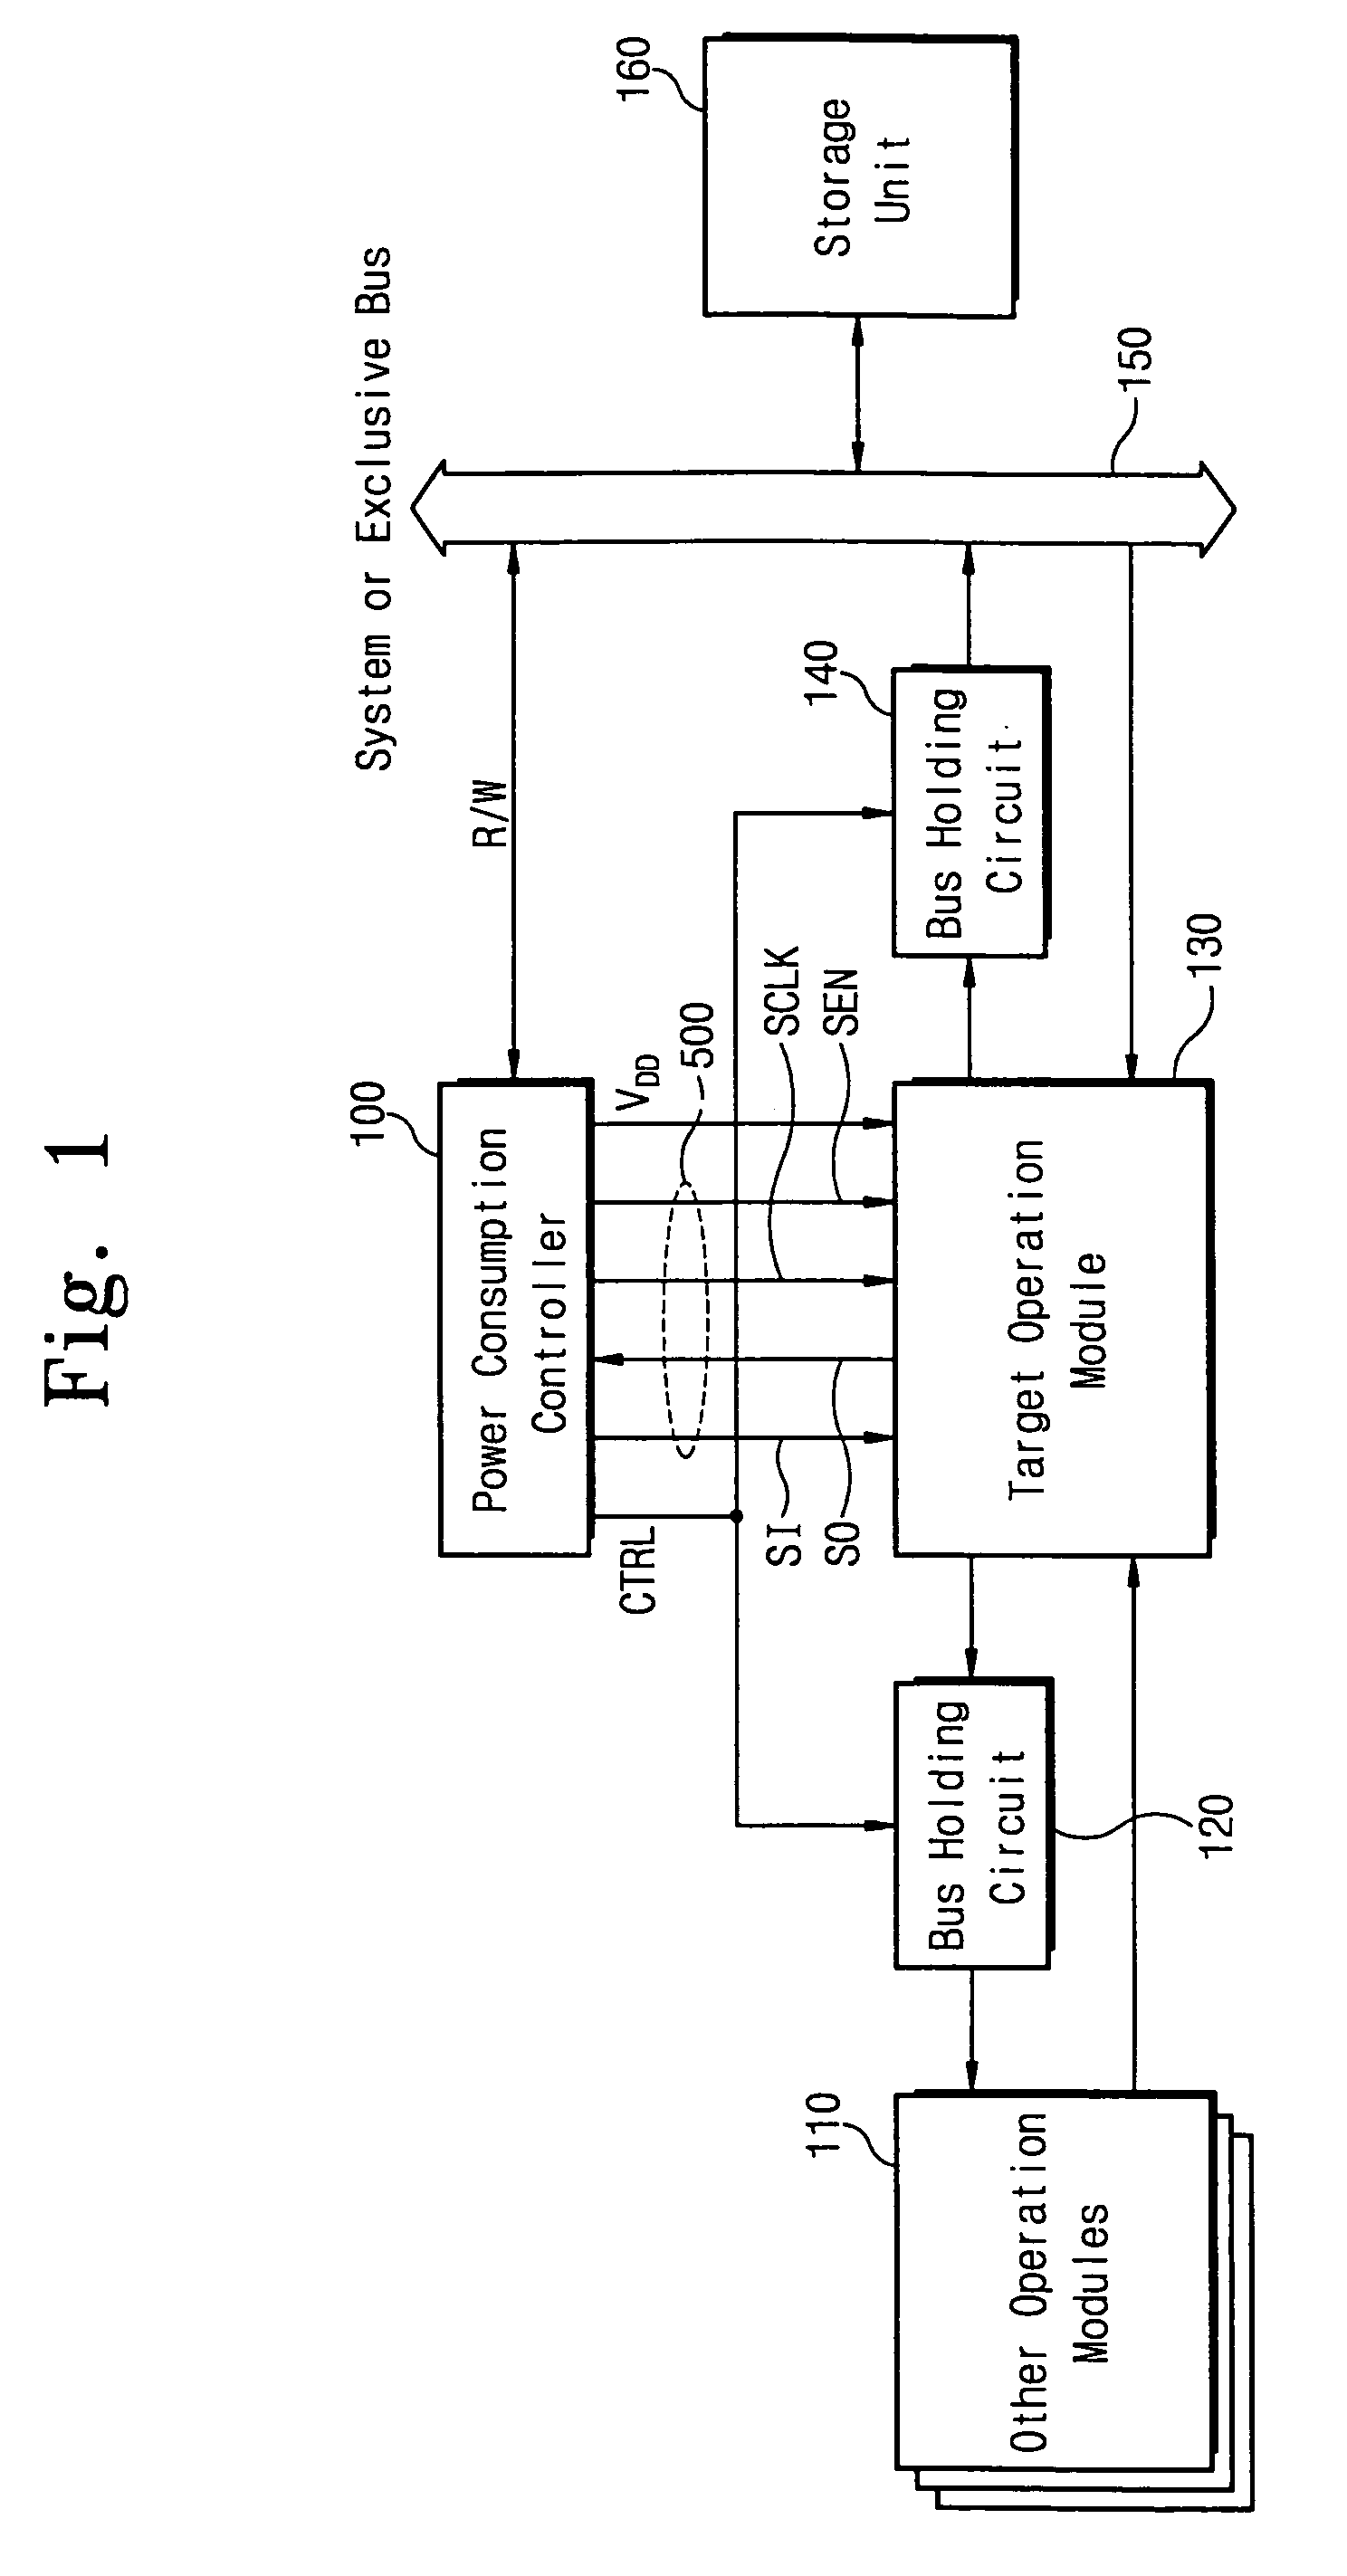 System and apparatus for allowing data of a module in power saving mode to remain accessible